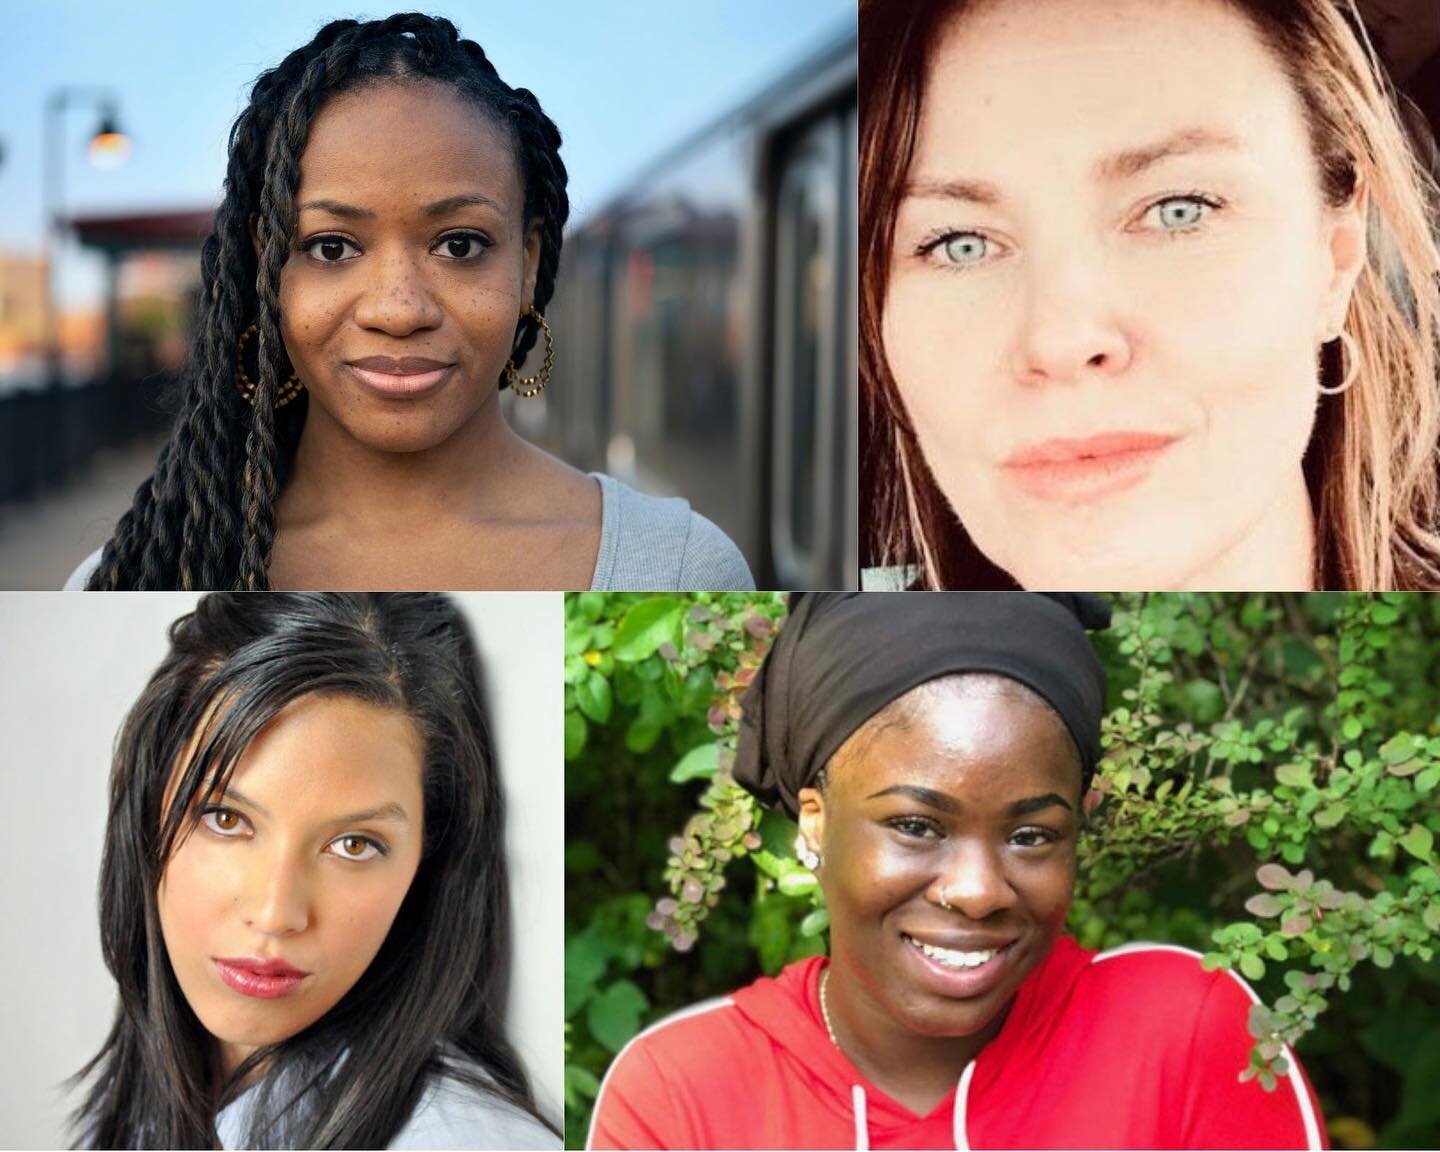 Our 2021 Online Theater Festival features 13 short plays and monologues, written and performed by a talented lineup of artists including Caridad Svich, reg e gaines, Ashley L. Calder&oacute;n, Jossie Ortiz, Nia Akilah Robinson and many more. Only on 